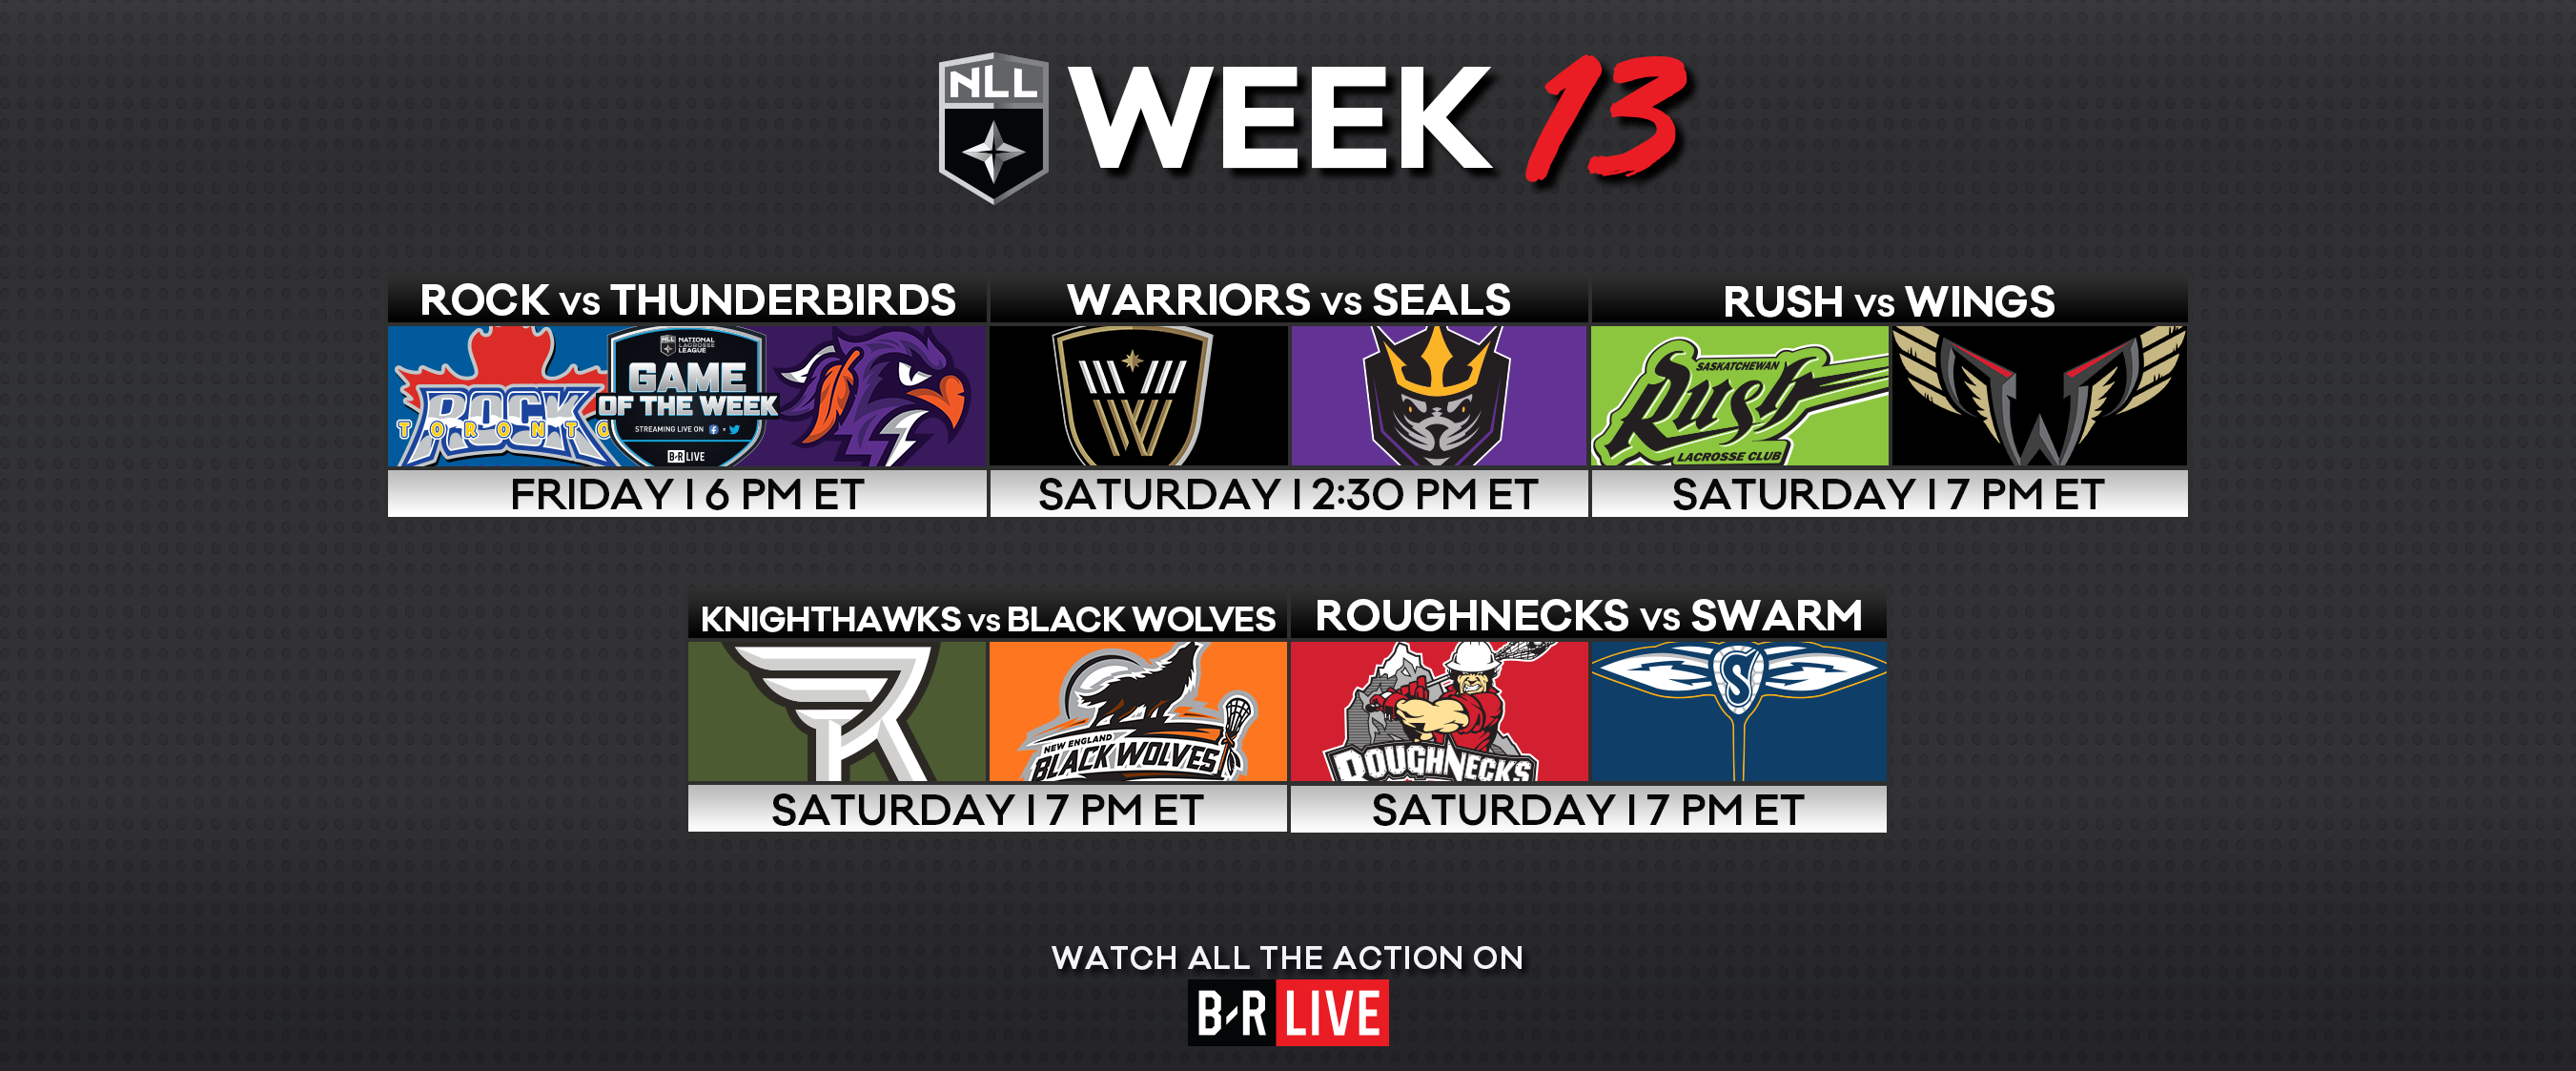 Week 13 Schedule, Game Info, How to Watch NLL